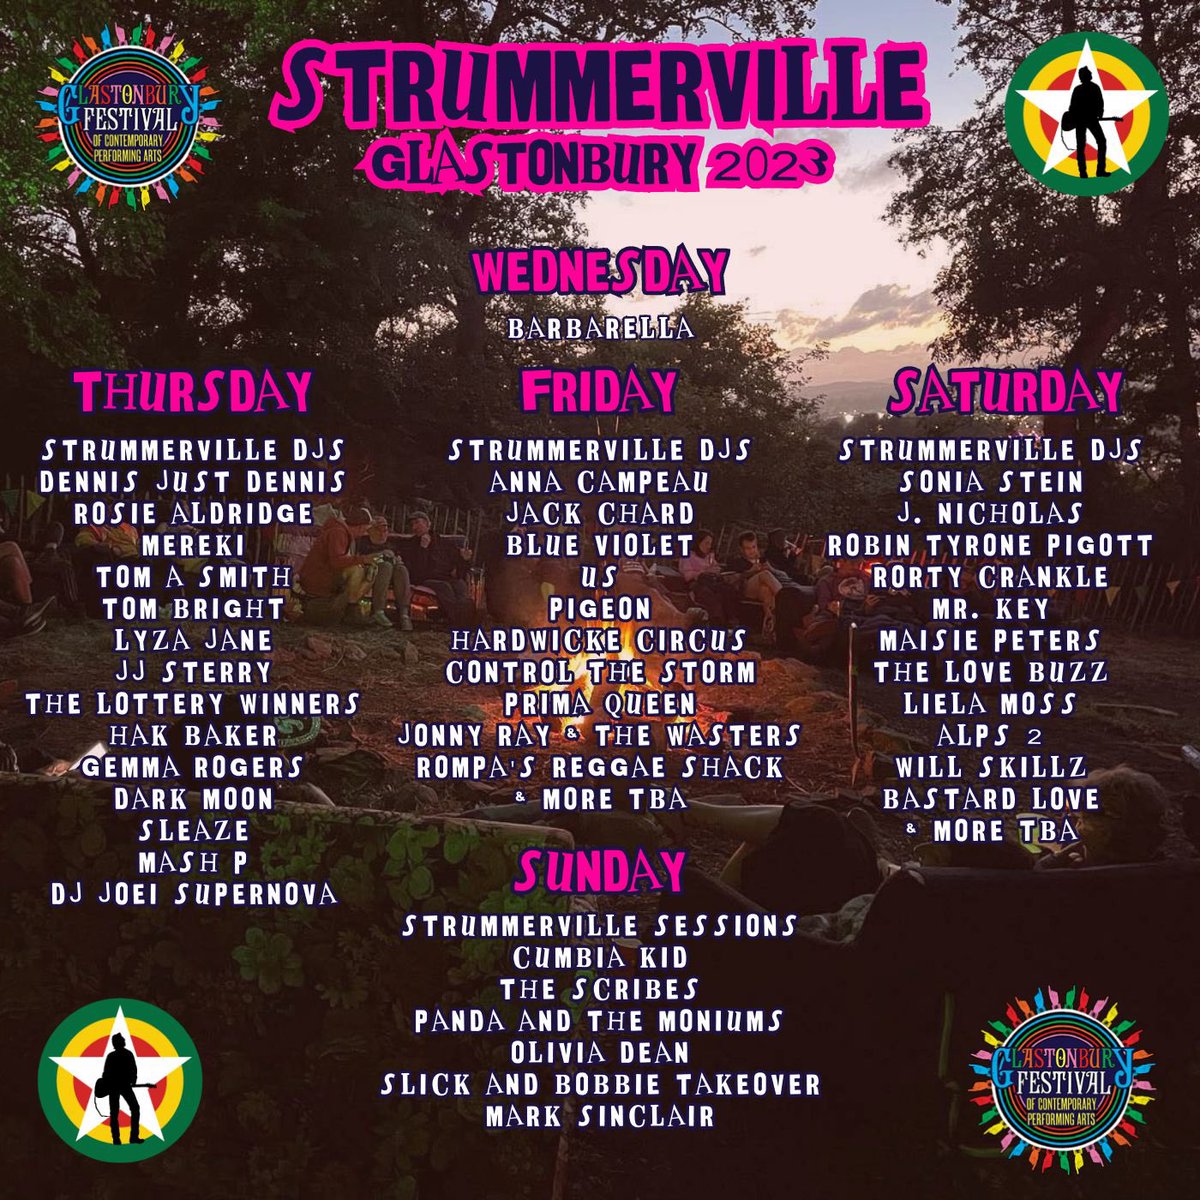 Yes Yes @glastonbury ❤️ @joestrummerfund 

I’m properly THRILLED to be part of this magnificent line up. See you high on the hill at camp STRUMMERVILLE- Thursday at 9pm. 

X